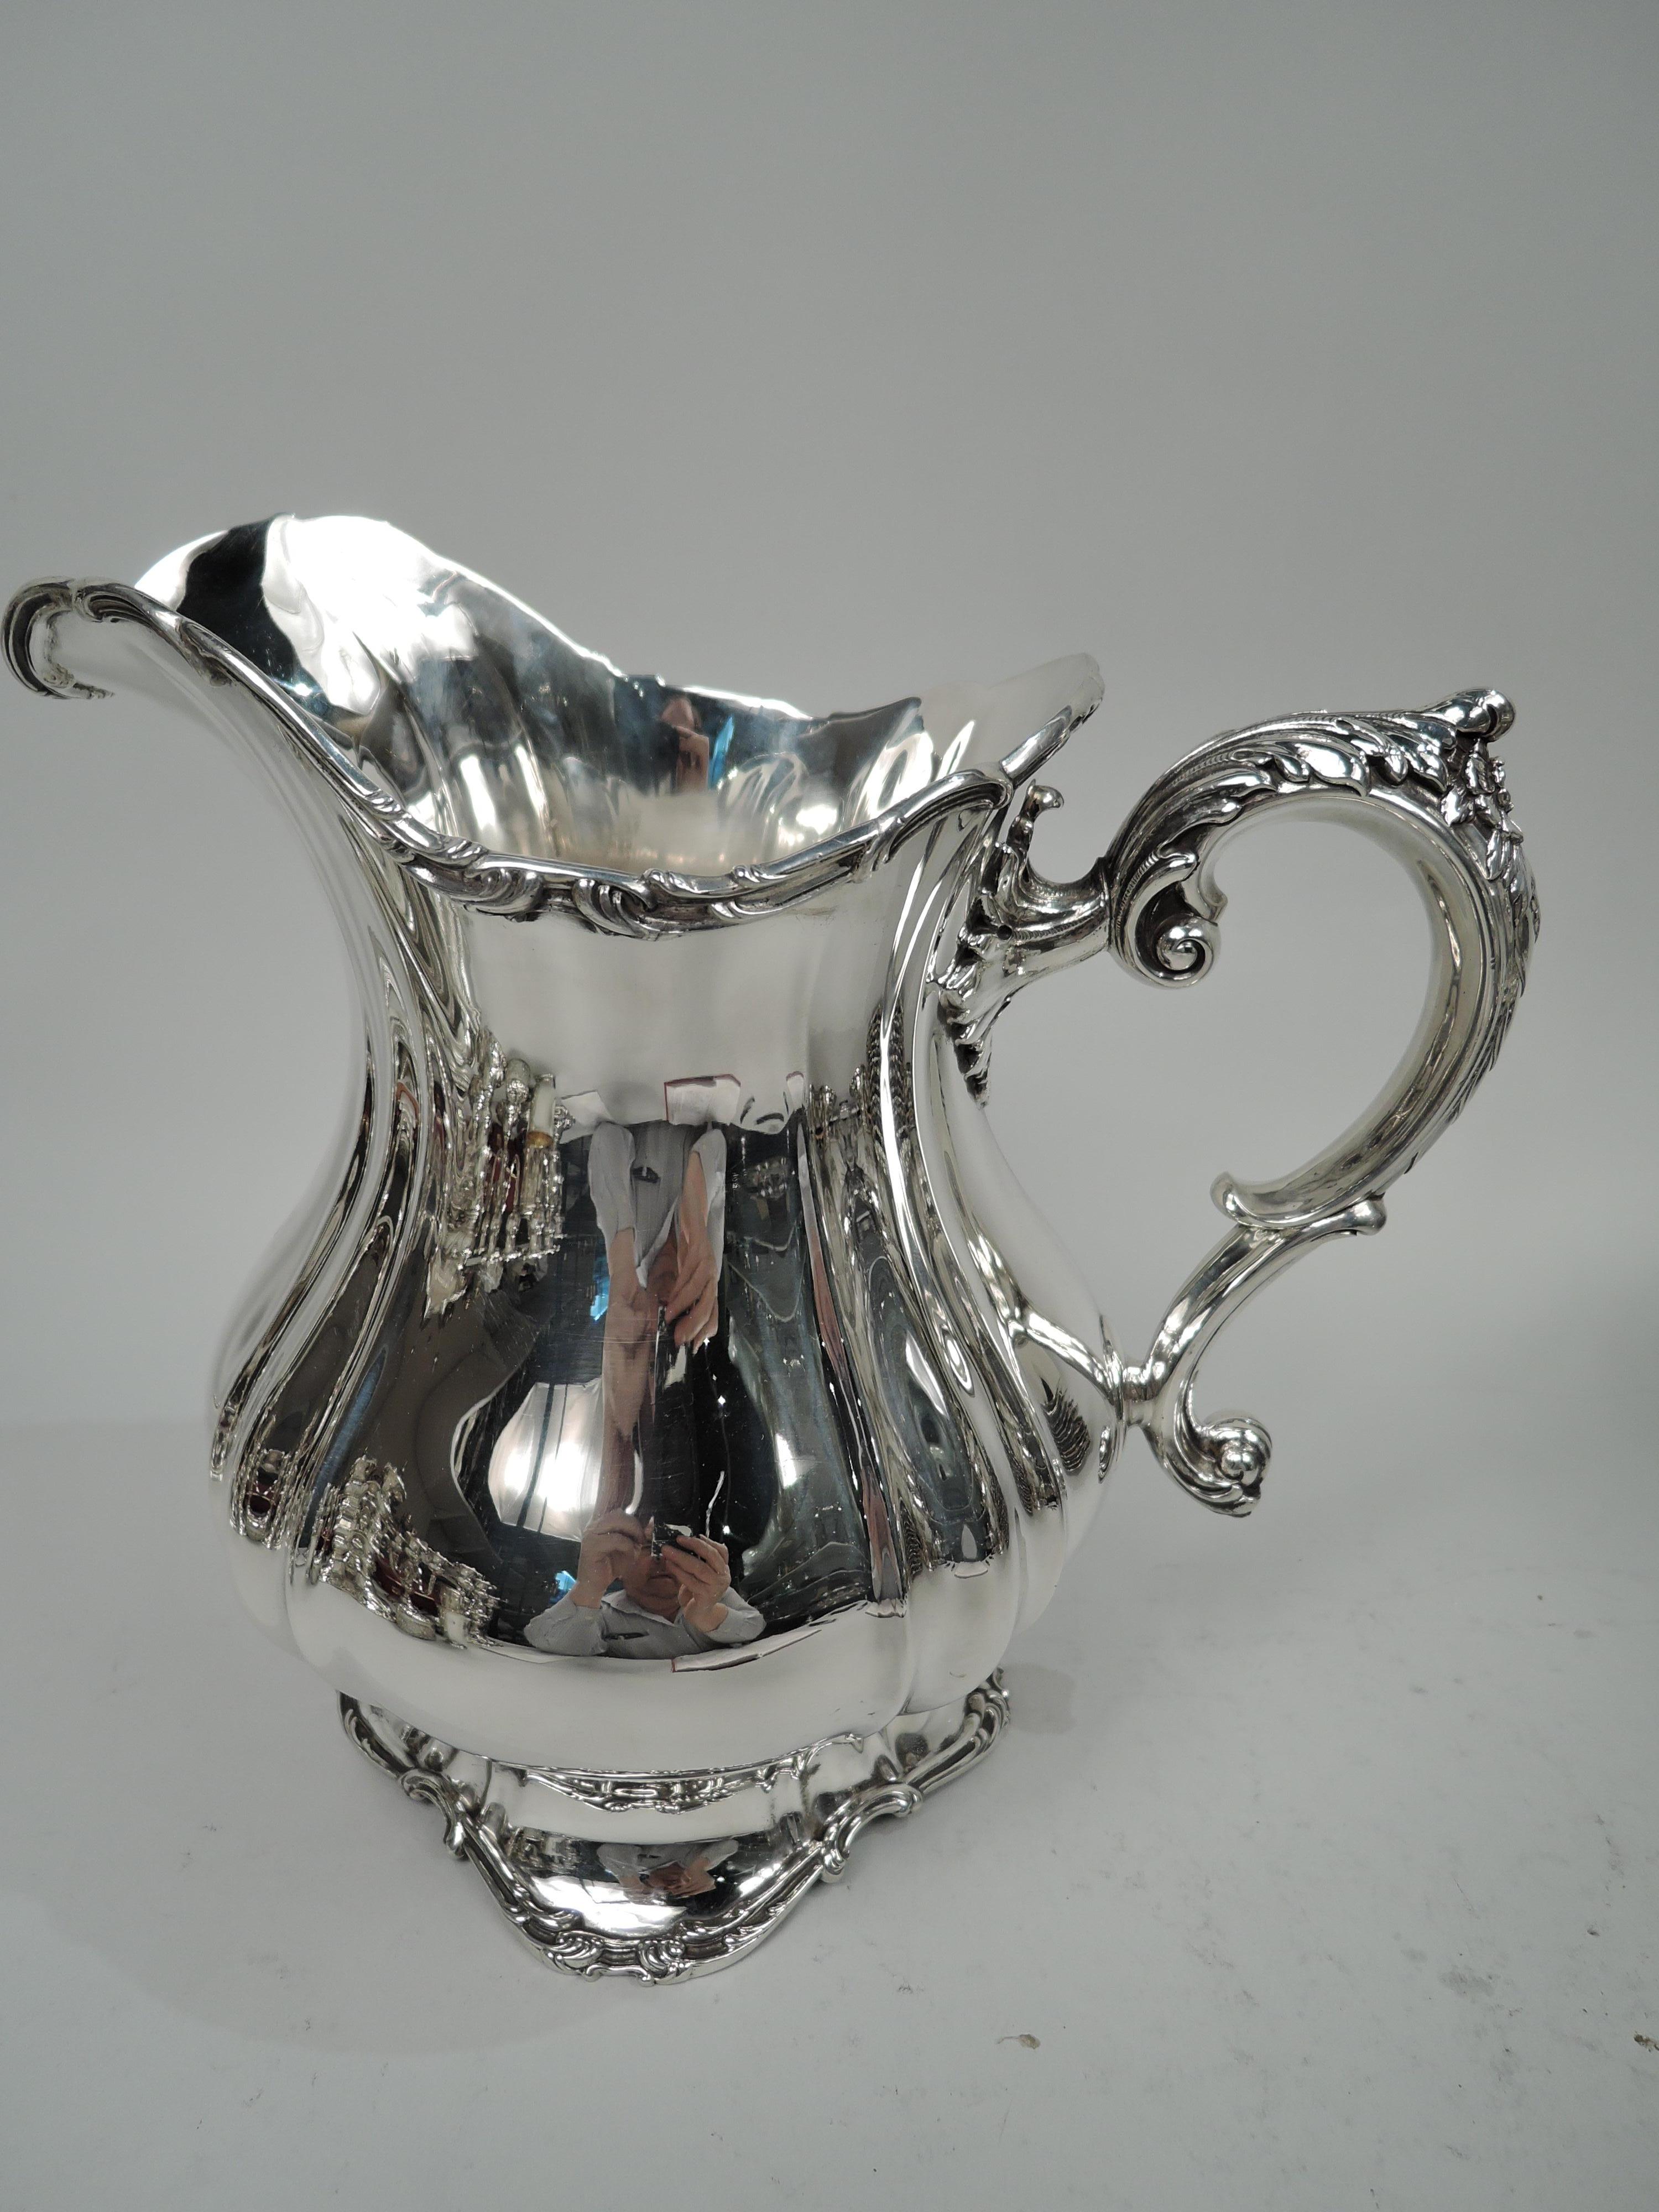 Edwardian Classical sterling silver water pitcher. Made by Gorham in Providence in 1904. Fluted baluster with helmet mouth and leaf-mounted and leaf and flower-capped s-scroll handle; raised and wavy foot. Rims have applied scrolls. Fully marked